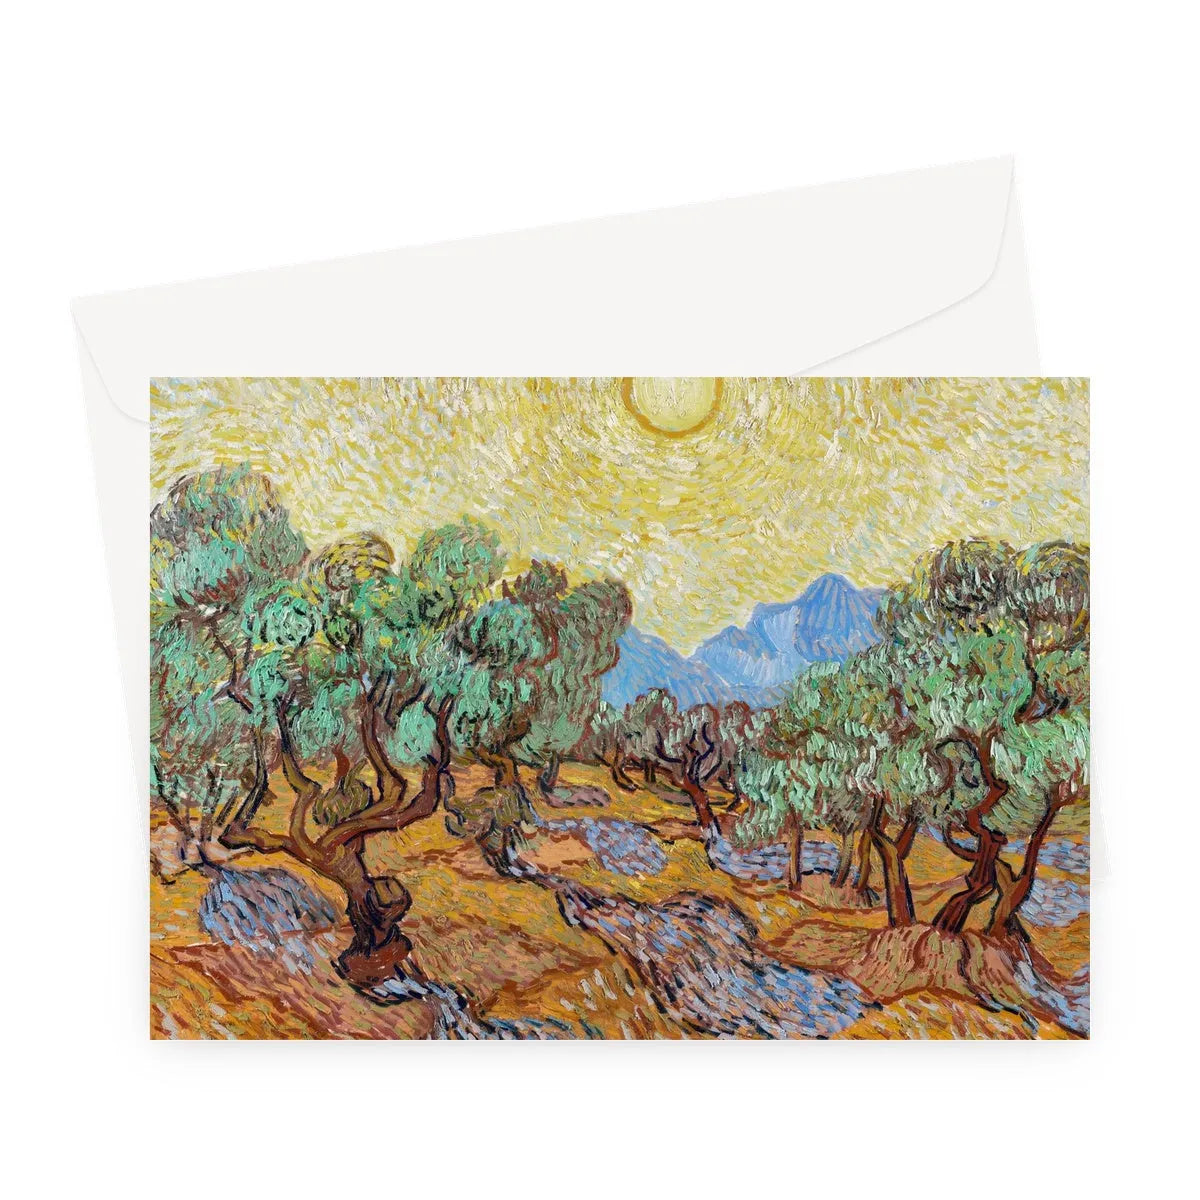 Olive Trees Too - Vincent Van Gogh Post-impressionism Card - A5 Landscape / 1 Card - Greeting & Note Cards - Aesthetic